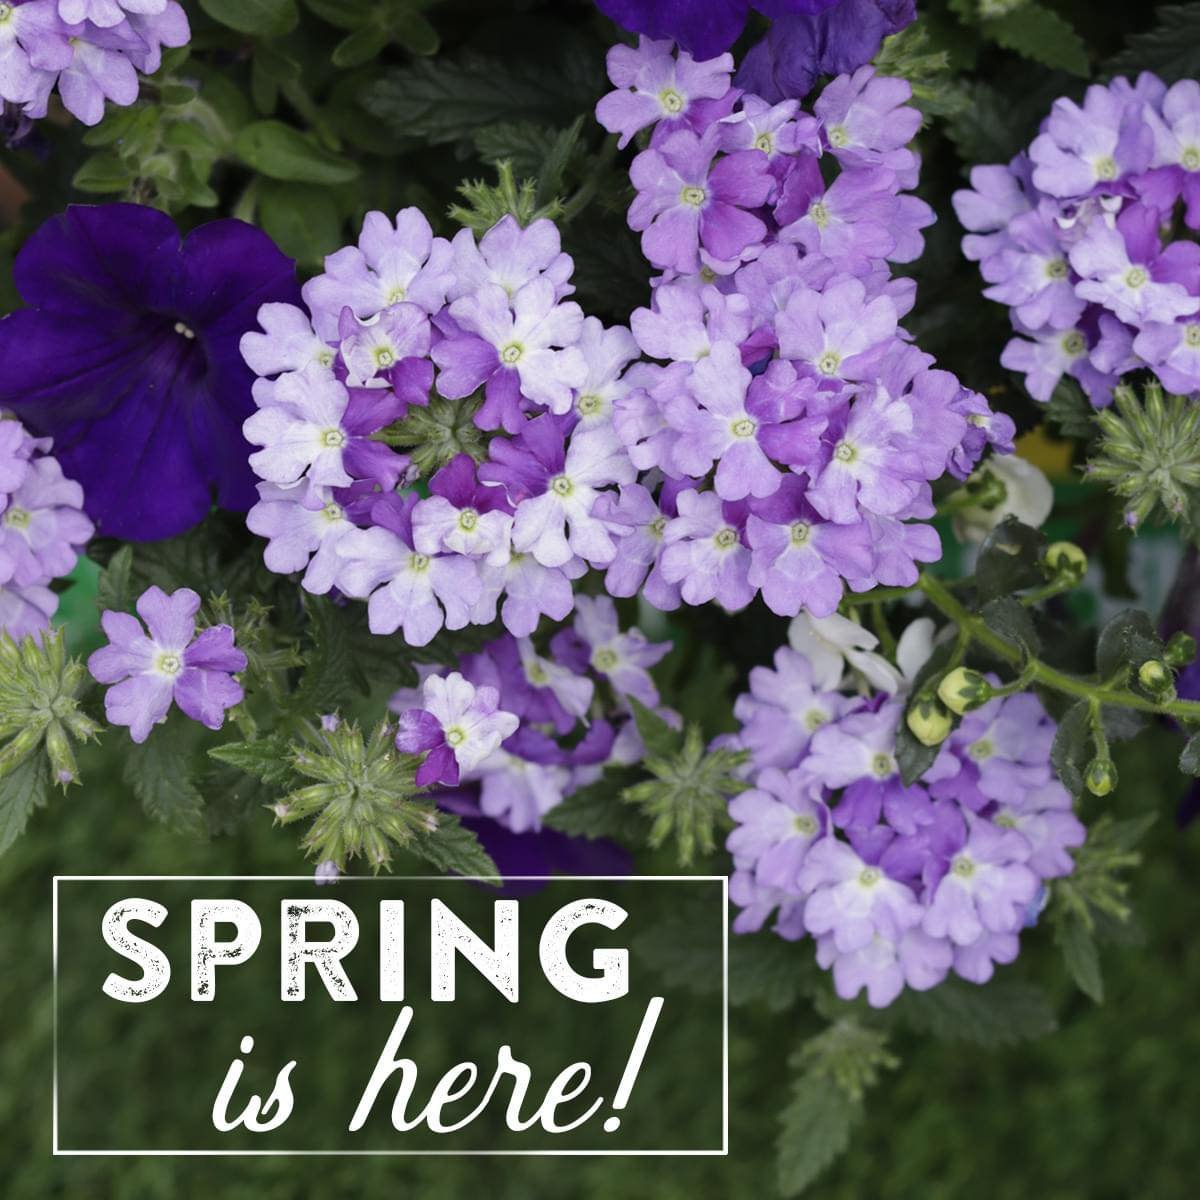 Today is the first day of spring! It&rsquo;s also one month until we open! We&rsquo;re still getting things planted and arranged in the greenhouse, but we&rsquo;ll be seeing you very soon. 😁🌸🌺🌼